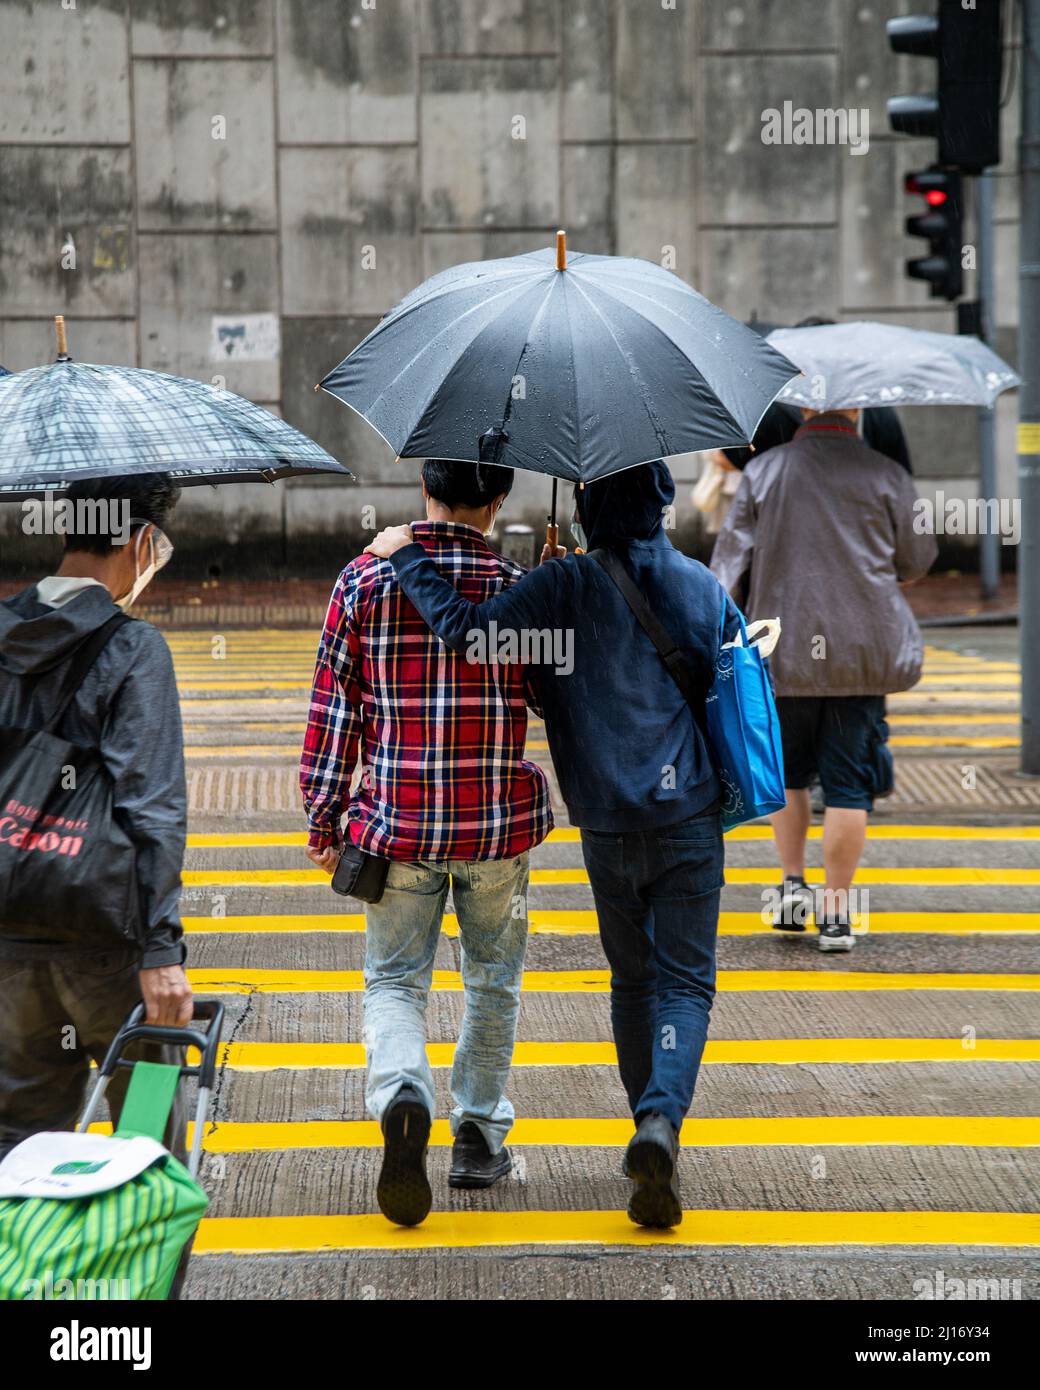 Hong Kong, Hong Kong. 23rd Mar, 2022. Two people share an umbrella to protect themselves from the rain as a northern monsoon brings cooler weather and rain to Hong Kong. A rainy, spring day in Hong Kong. (Photo by Ben Marans/SOPA Images/Sipa USA) Credit: Sipa USA/Alamy Live News Stock Photo